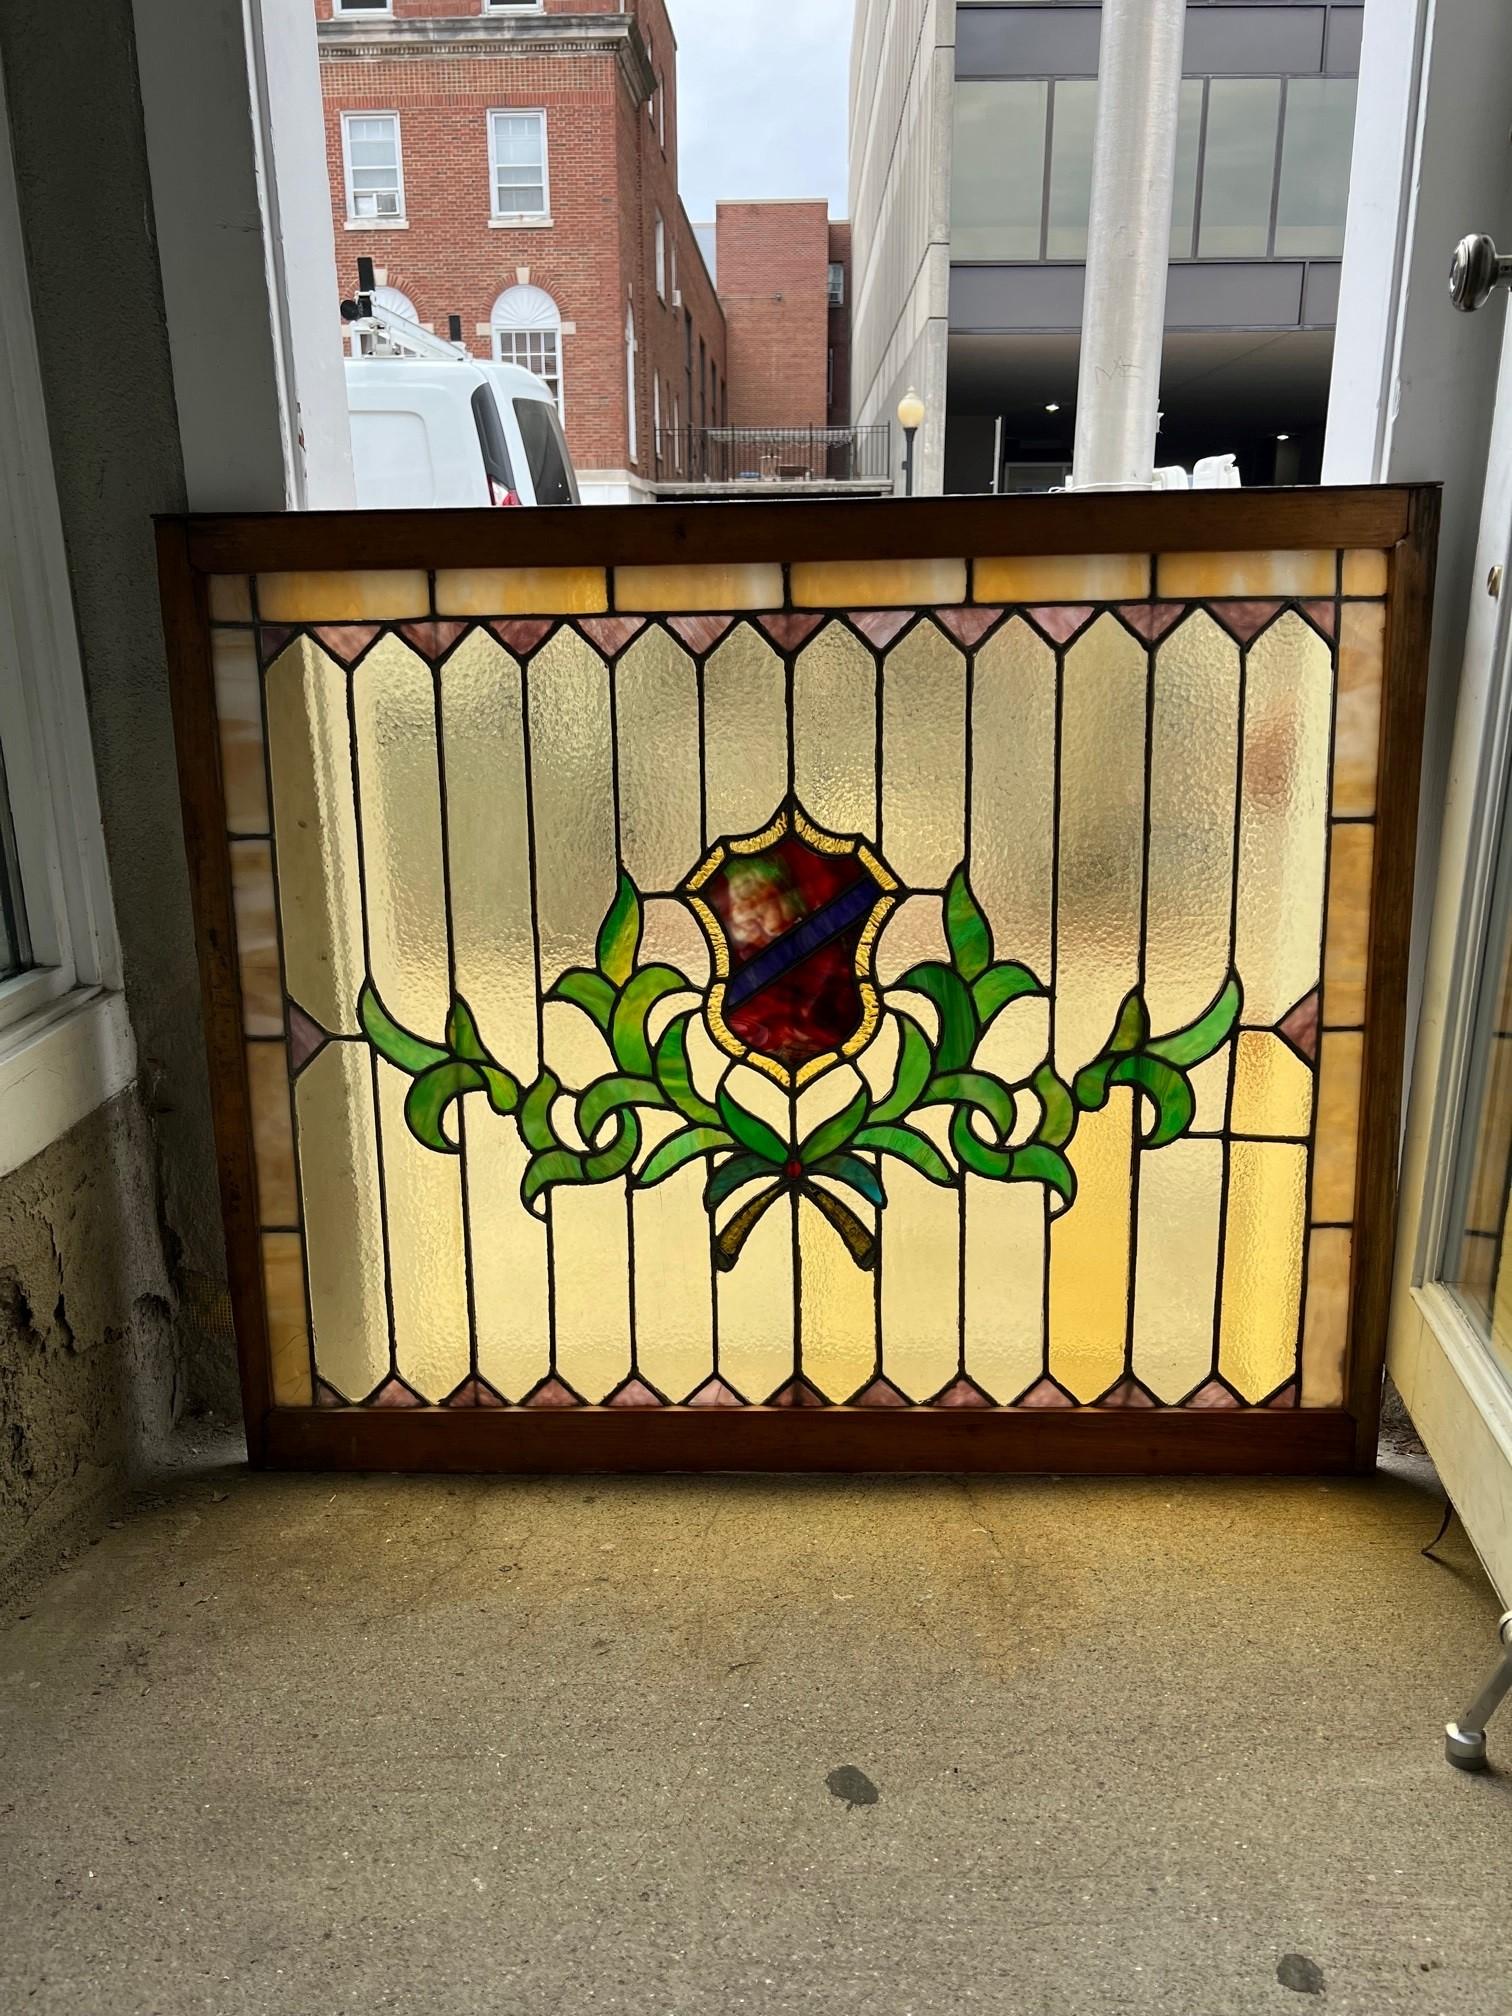  A nice large stained glass window with a central shield crest. It's a nice simple window from the late 19th to early 20th century salvaged from an estate in Westchester County NY. The stained glass window has bright colors with a few small cracks,